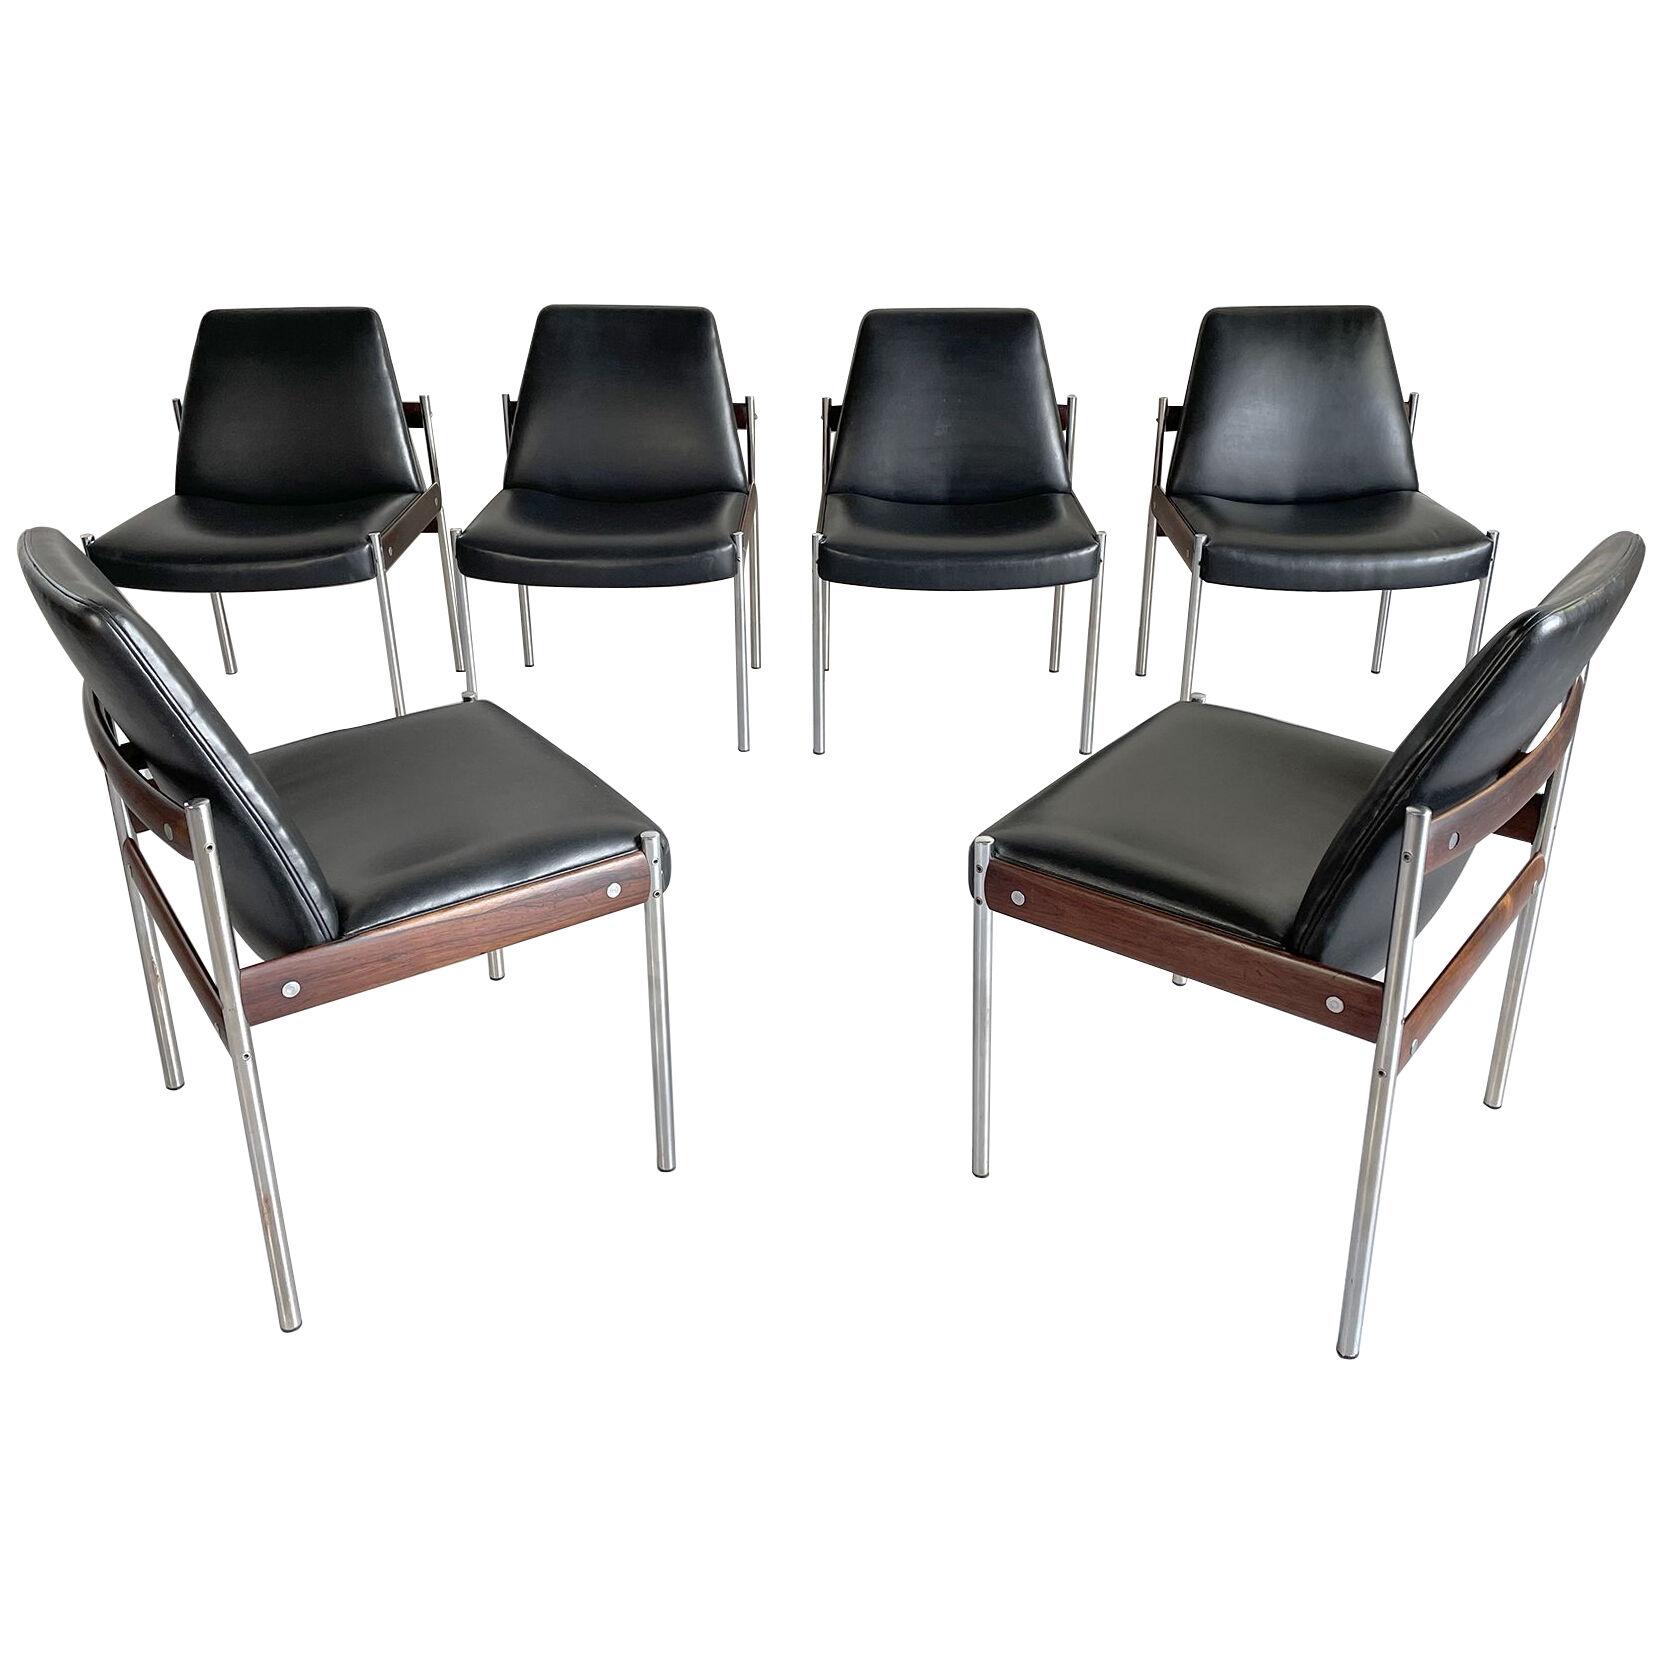 Series of 6 "3001" Chairs by Sven Ivar Dysthe, 1960